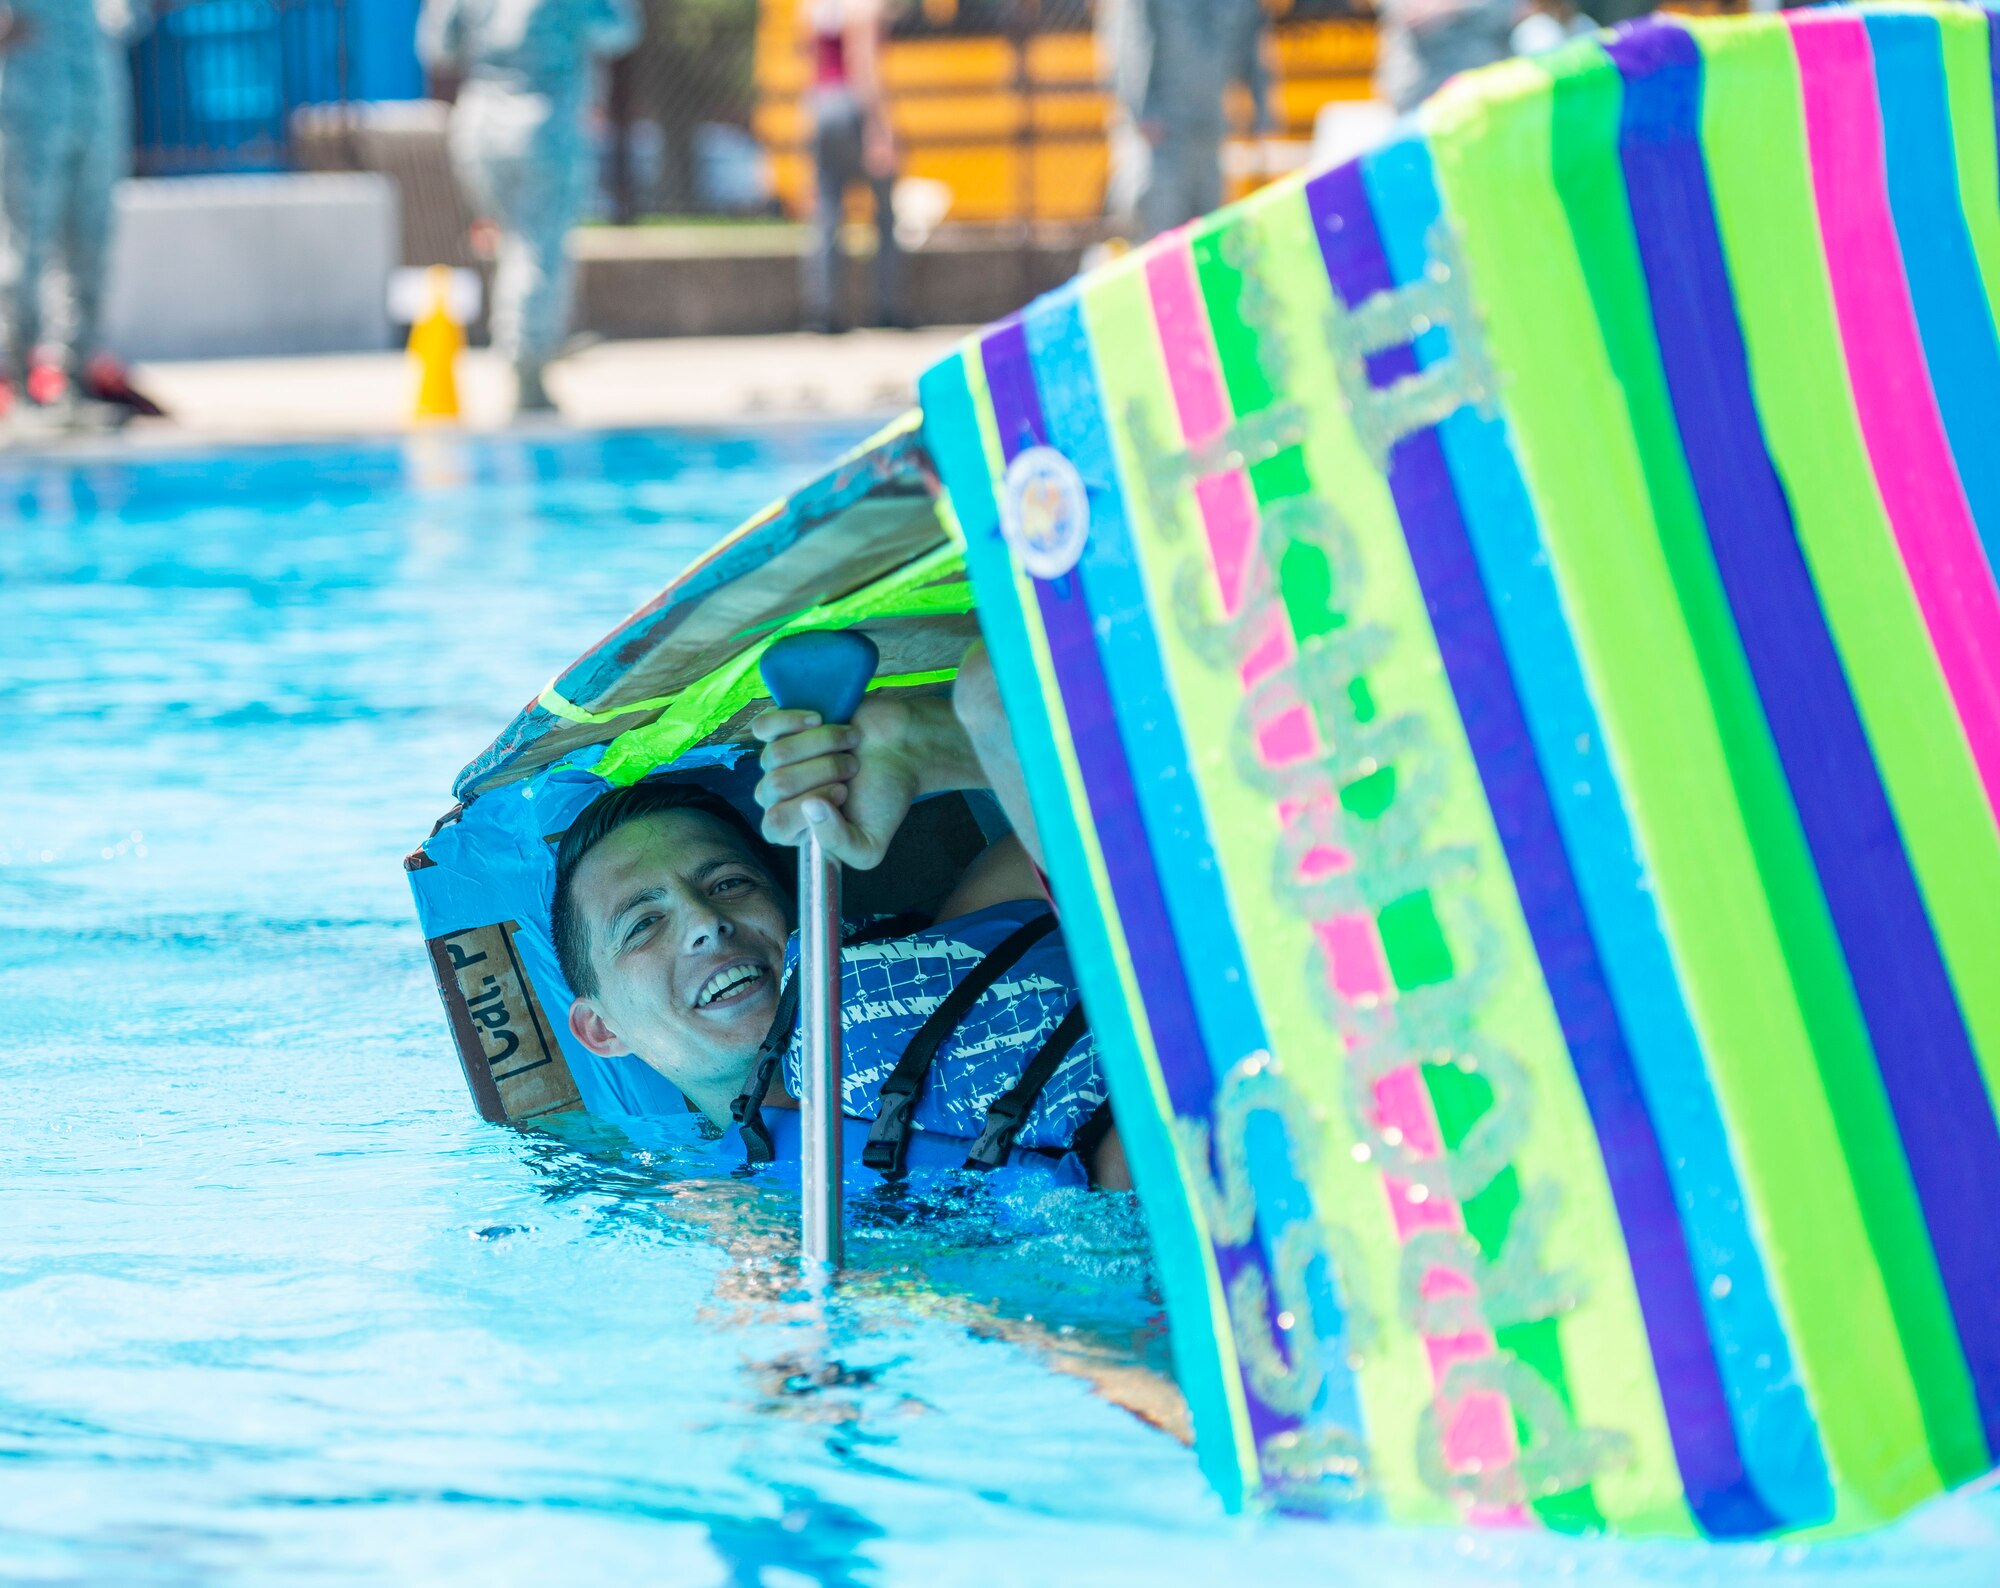 A Fitness Center Pool life guard makes his last attempt to stay afloat during the 375th Force Support Squadron Outdoor Recreation’s 11th Annual Cardboard Boat Regatta Aug. 10 at Scott Air Force Base, Illinois.